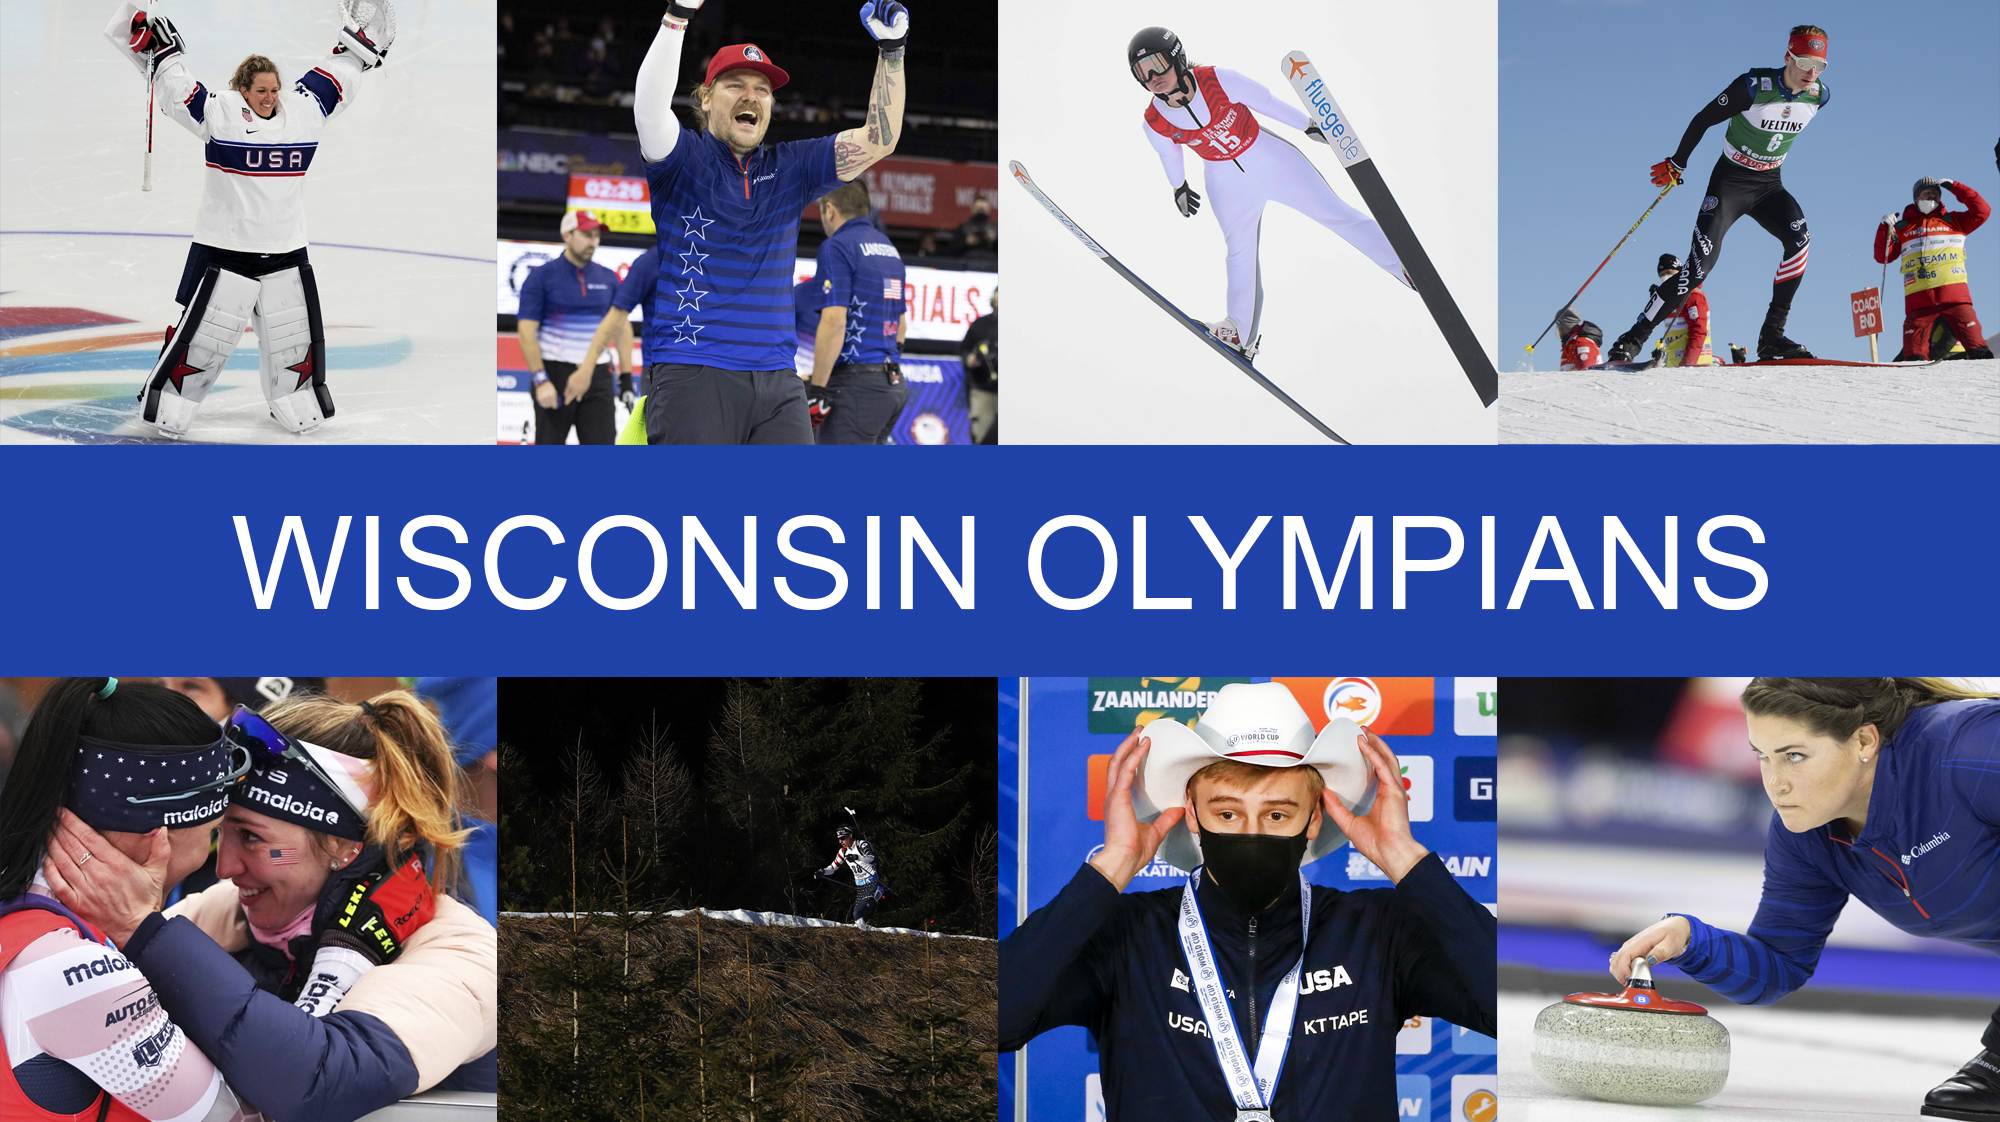 Wisconsin athletes competing at the 2022 Winter Olympics in Beijing